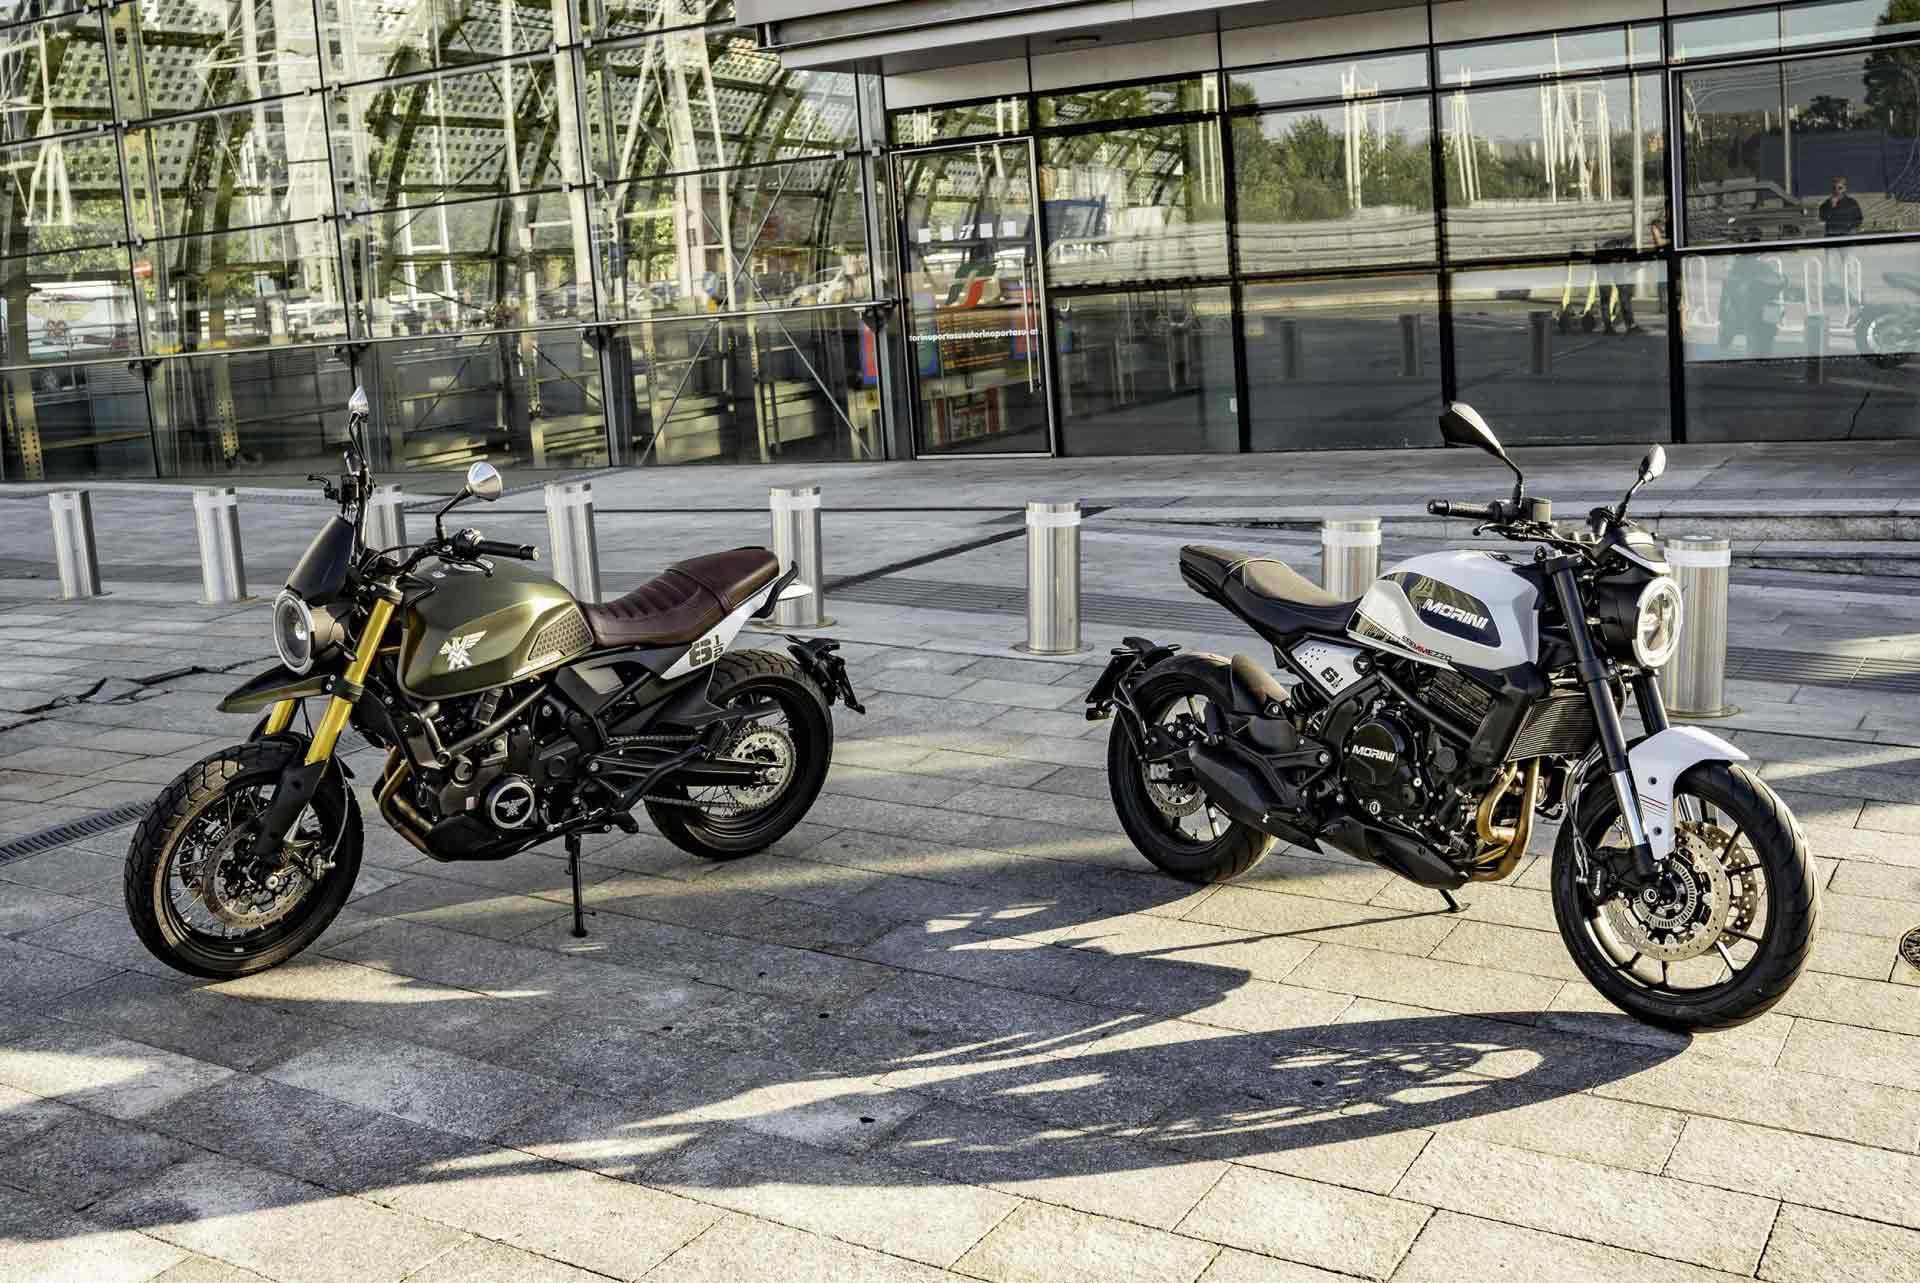 There are a few versions of the Seiemmezzo 6 1/2, the scrambler-style SCR (L), and the cafe-racer-style STR (R).